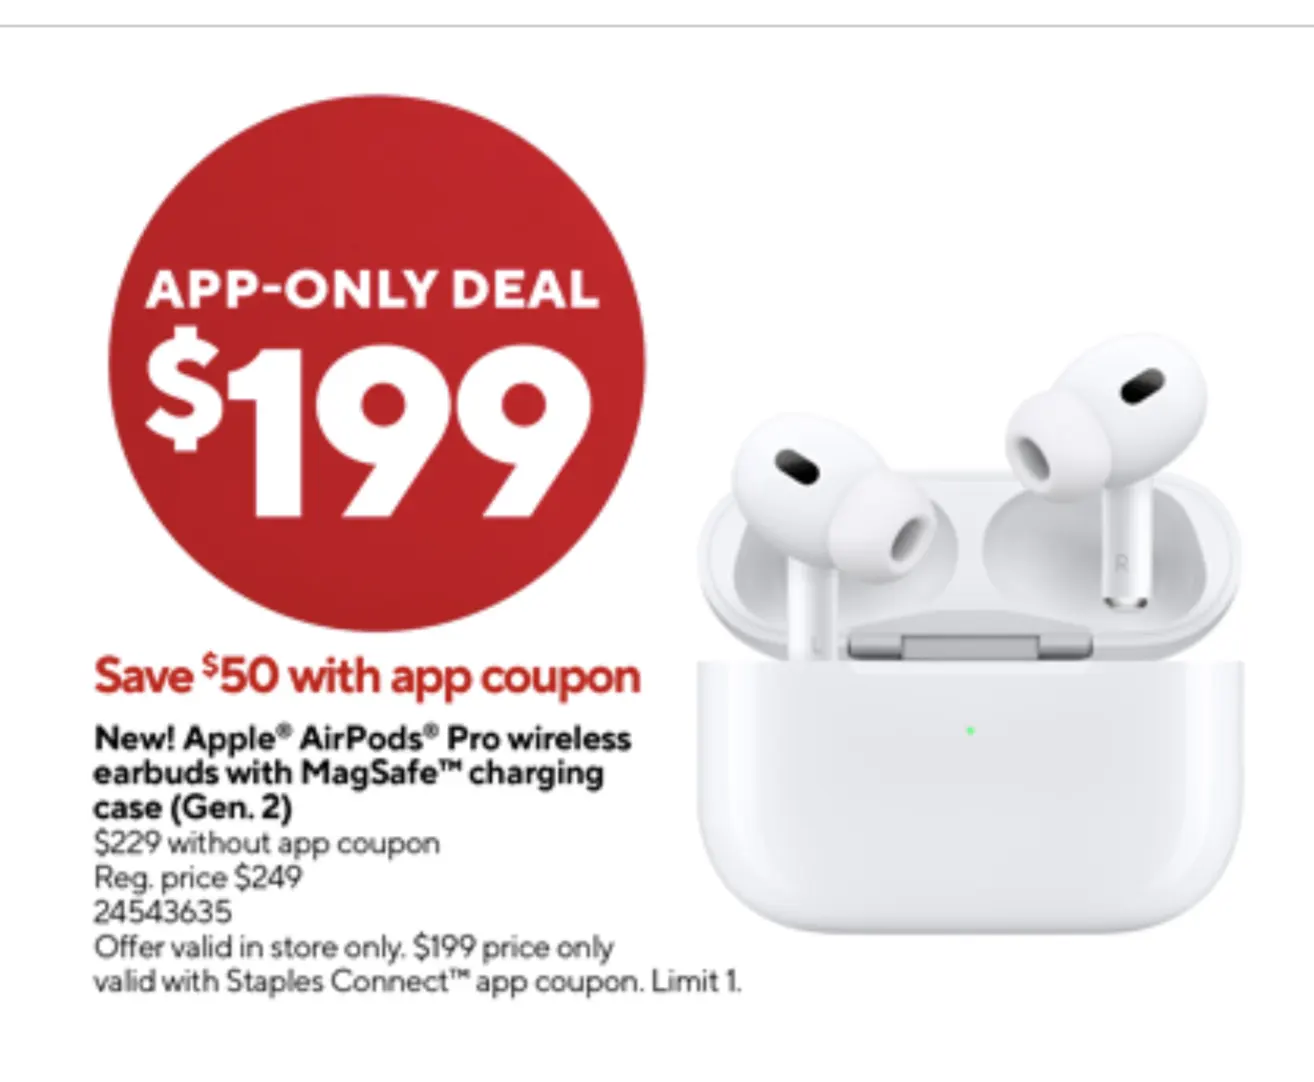 Staples In-Store Offer: Apple AirPods Pro 2nd Gen Earbuds w/ MagSafe Case